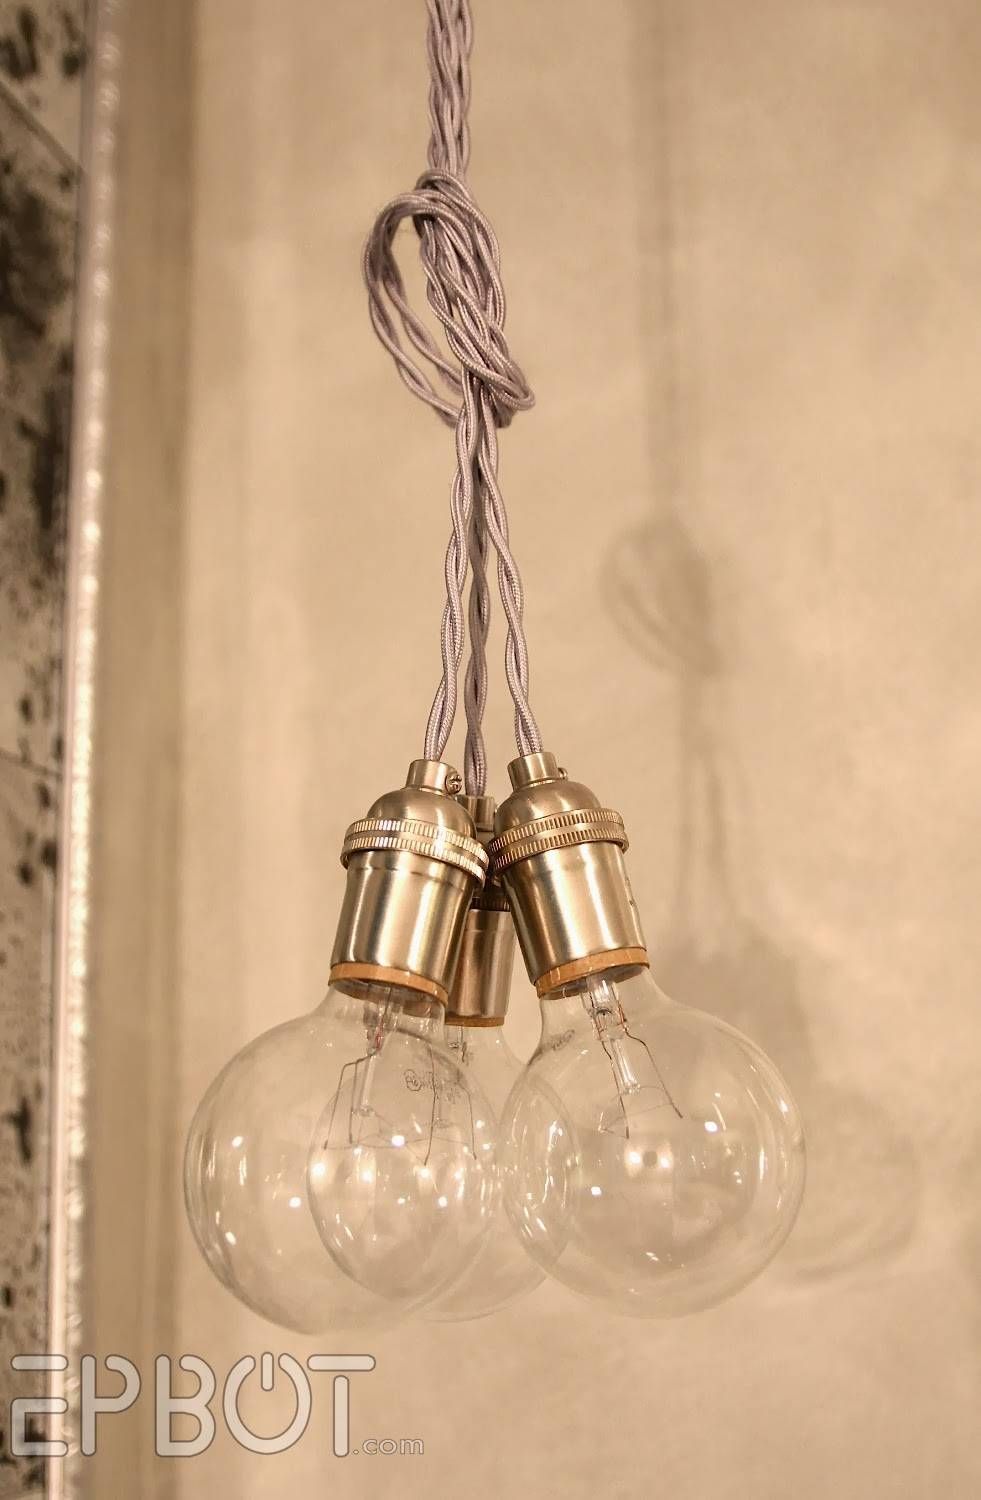 Epbot: Wire Your Own Pendant Lighting – Cheap, Easy, & Fun! Throughout Diy Suspension Cord Pendant Lights (View 2 of 15)